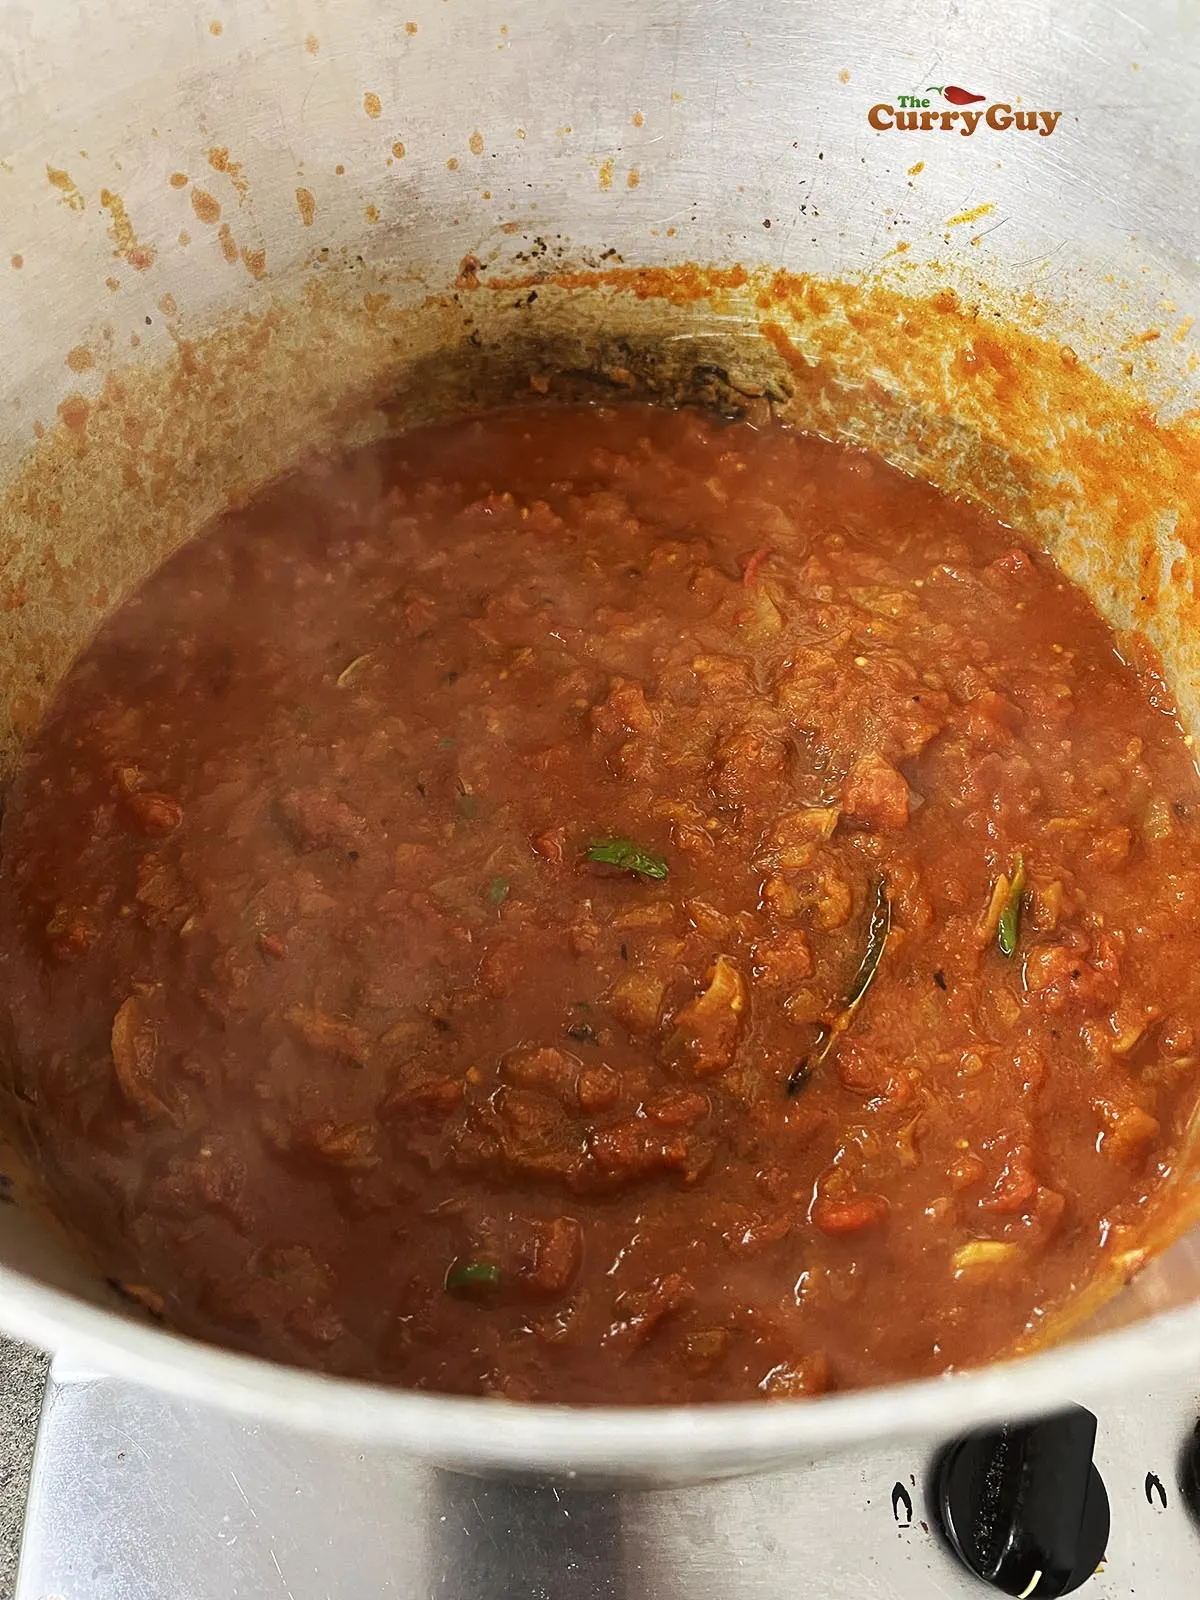 Adding the chopped tomatoes to the pot and bringing to a simmer.